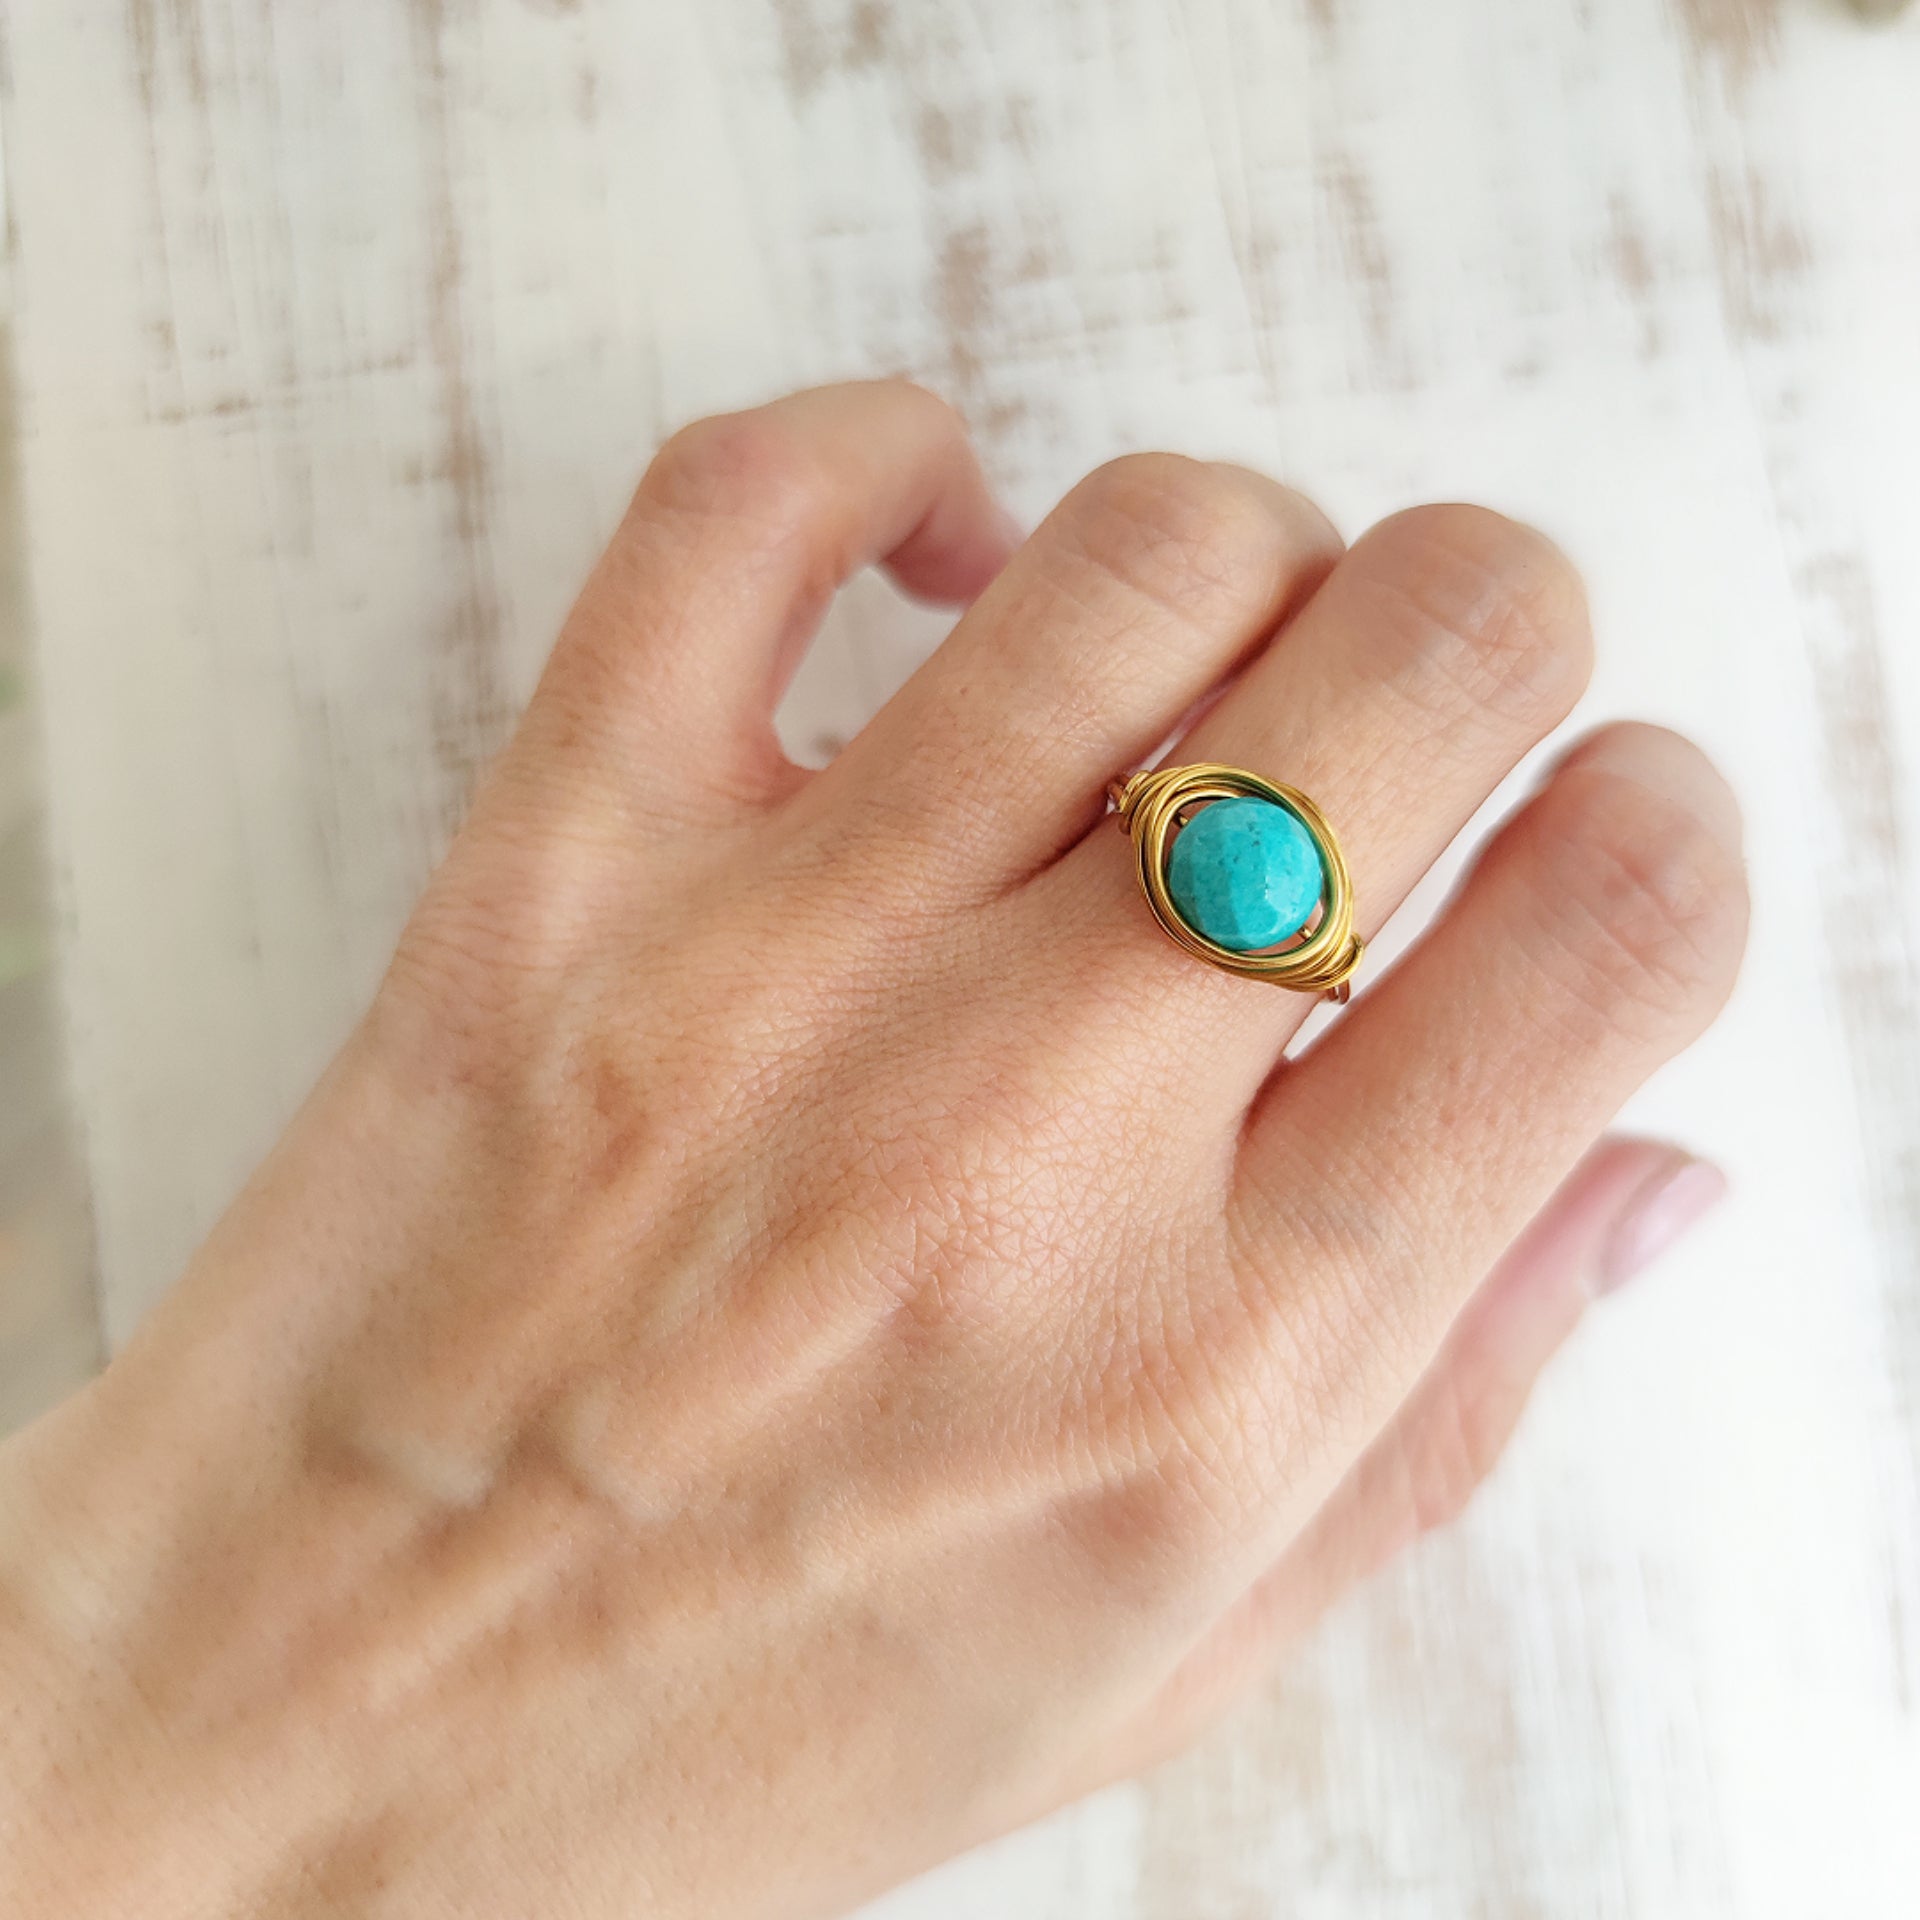 Mohave Oval Shaped Semi Precious Stone Adjustable Ring